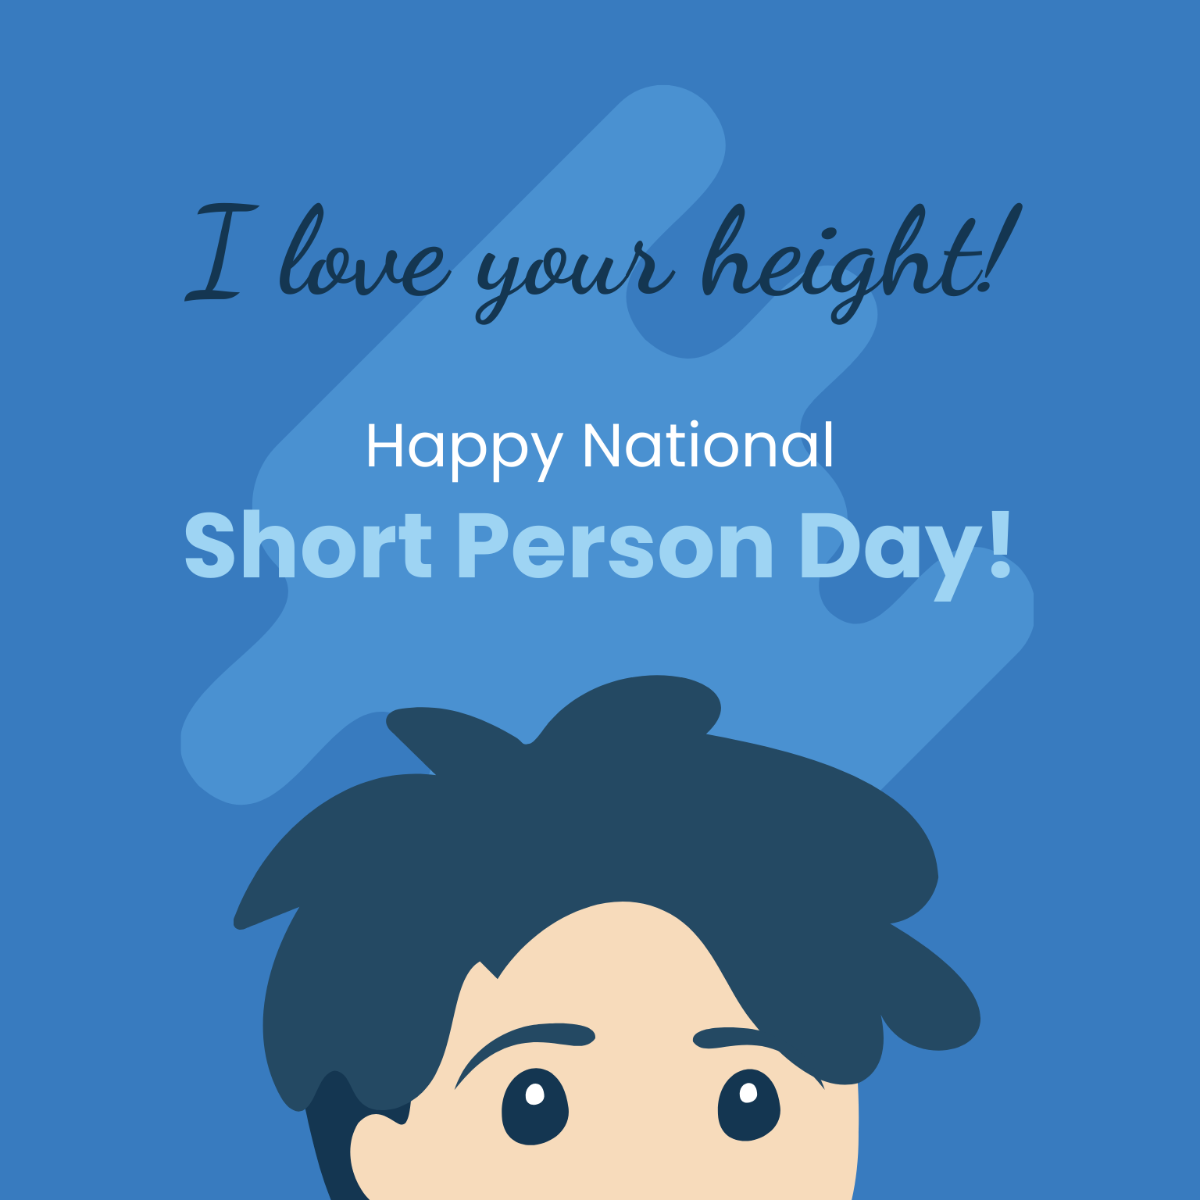 National Short Person Day Wishes Vector Template